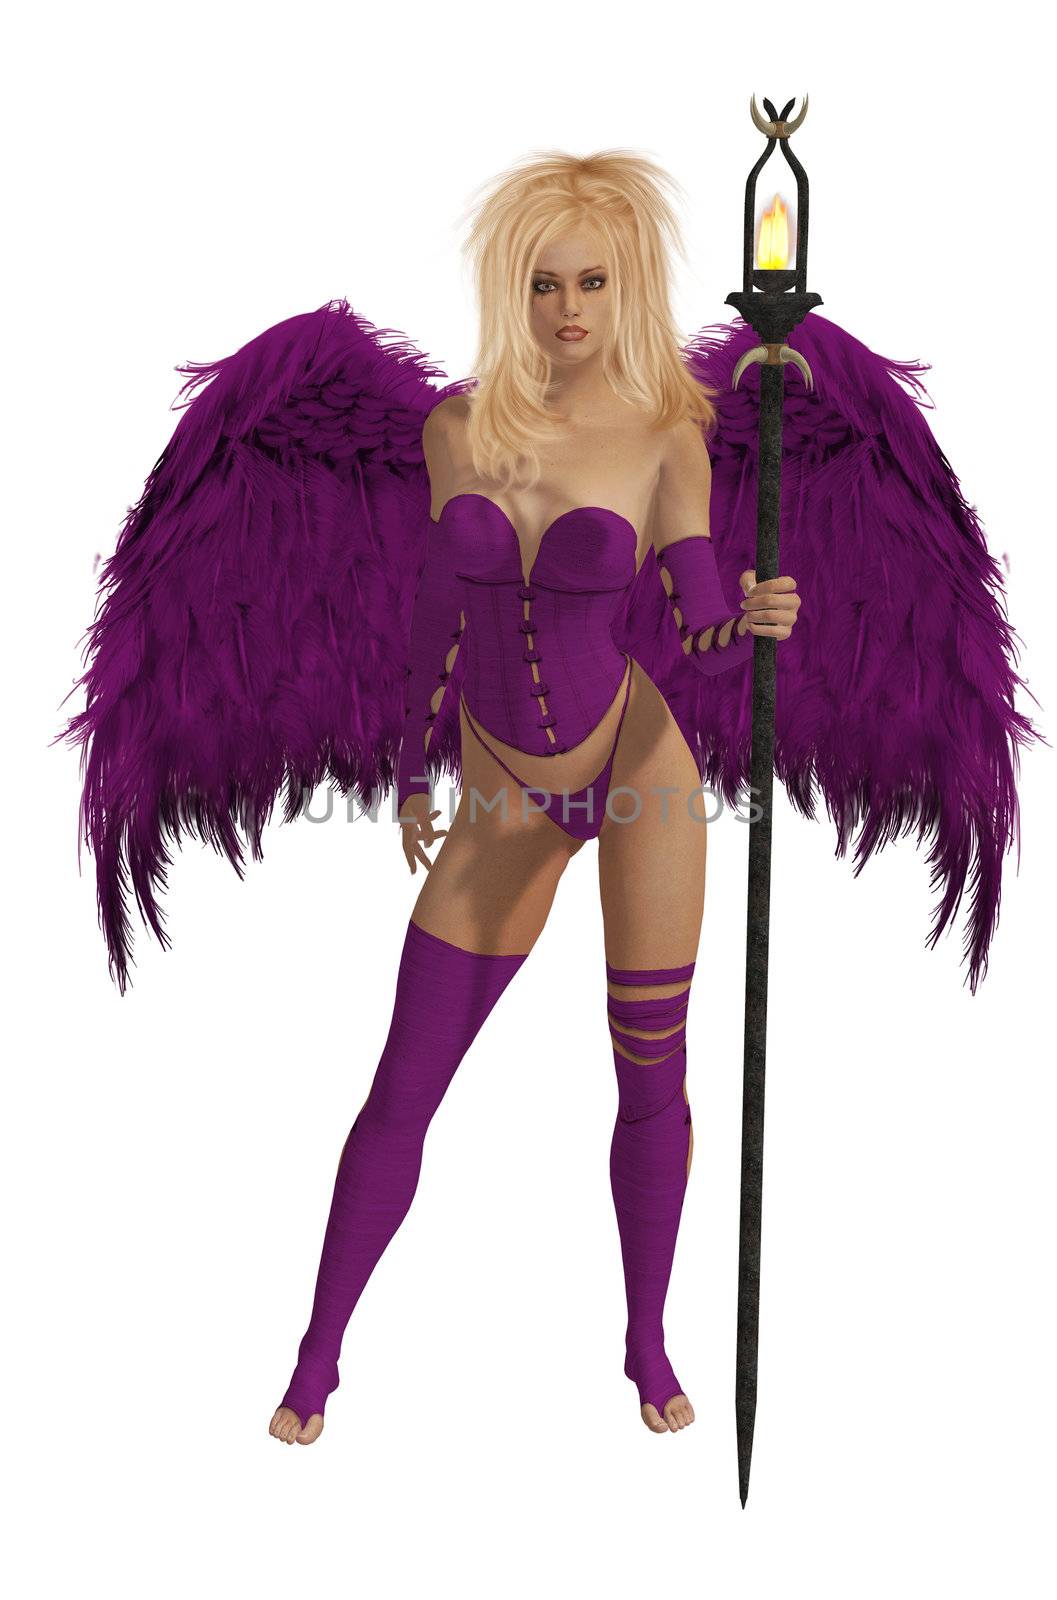 Purple Winged Angel With Blonde Hair by kathygold